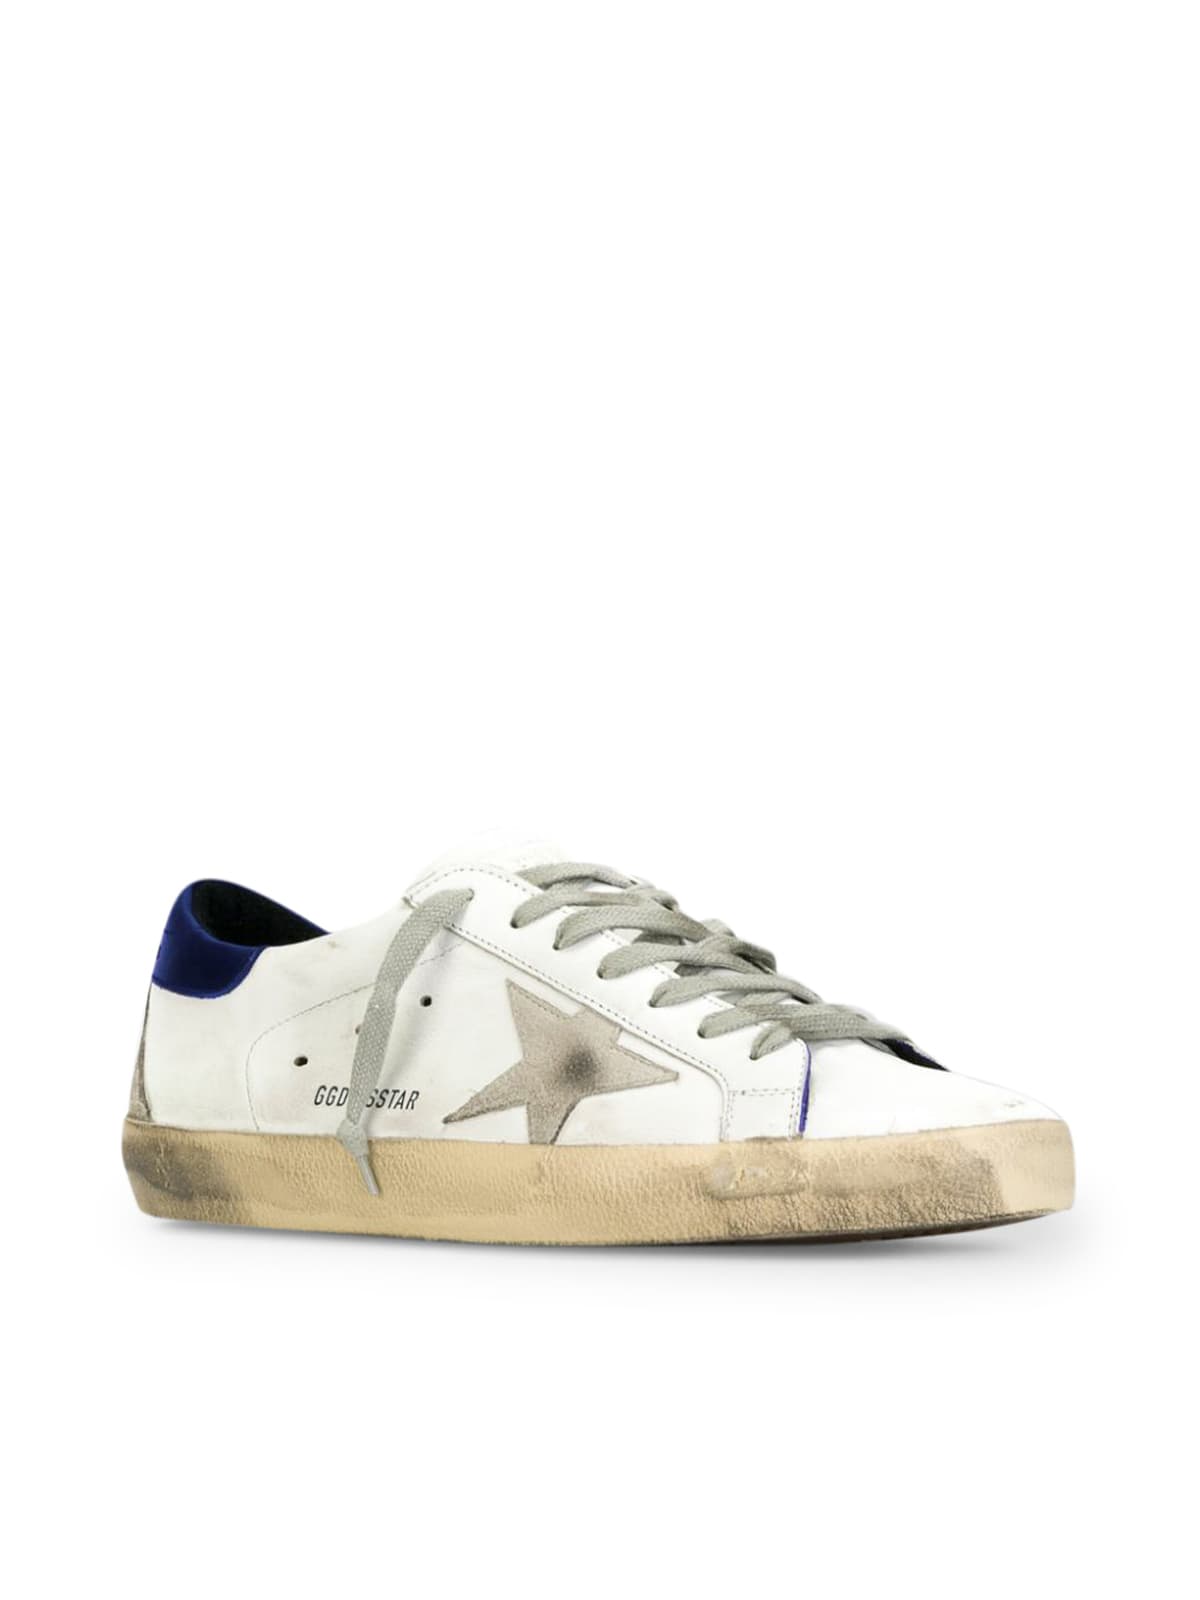 Golden Goose Super-star Leather Upper Suede Star Shiny Leather Heel In White